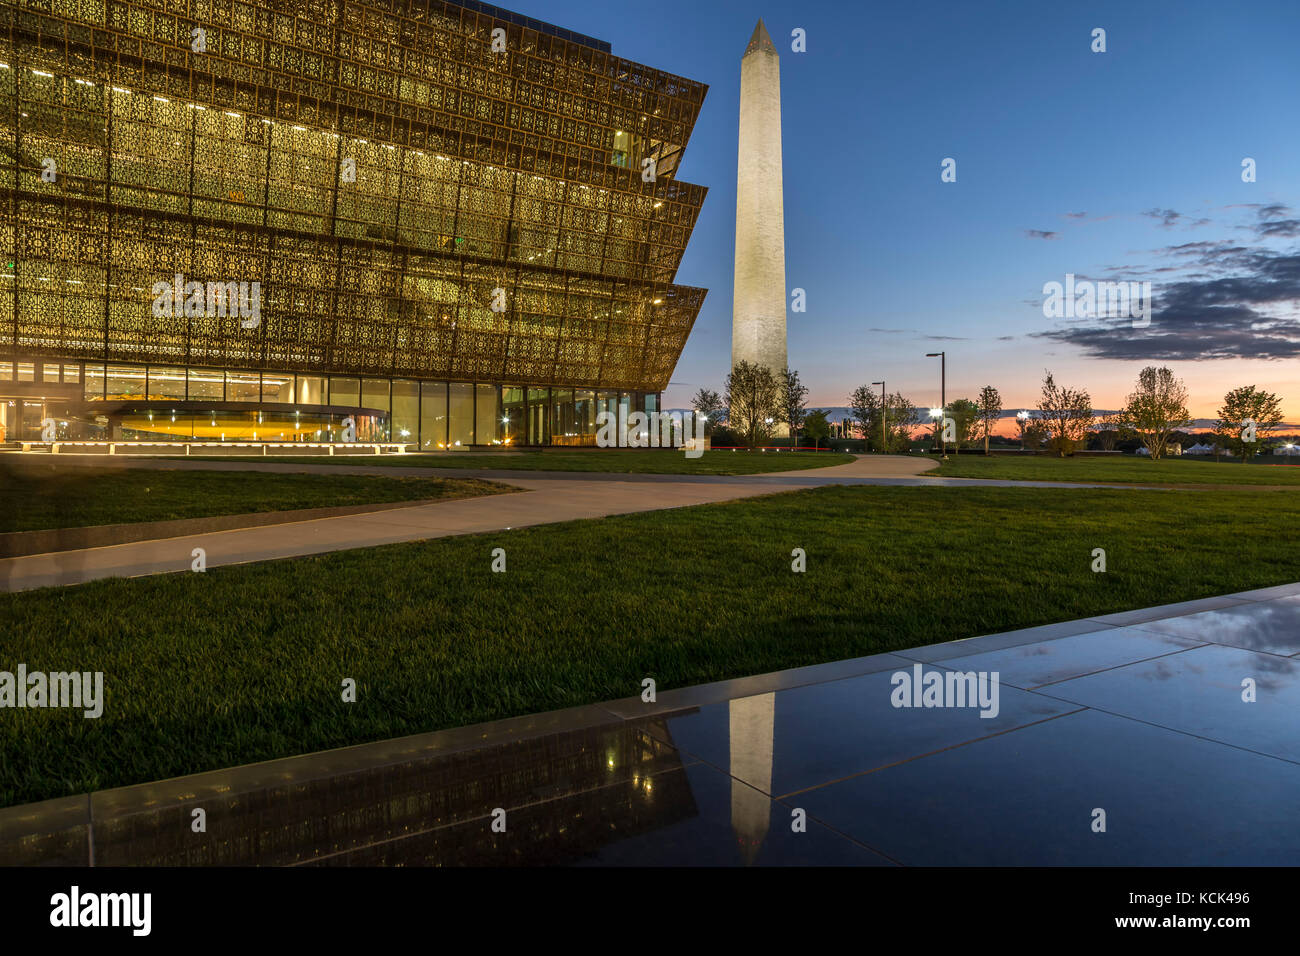 Smithsonian National Museum of African American History and Culture (left) and Washington Monument, Washington, District of Columbia USA Stock Photo